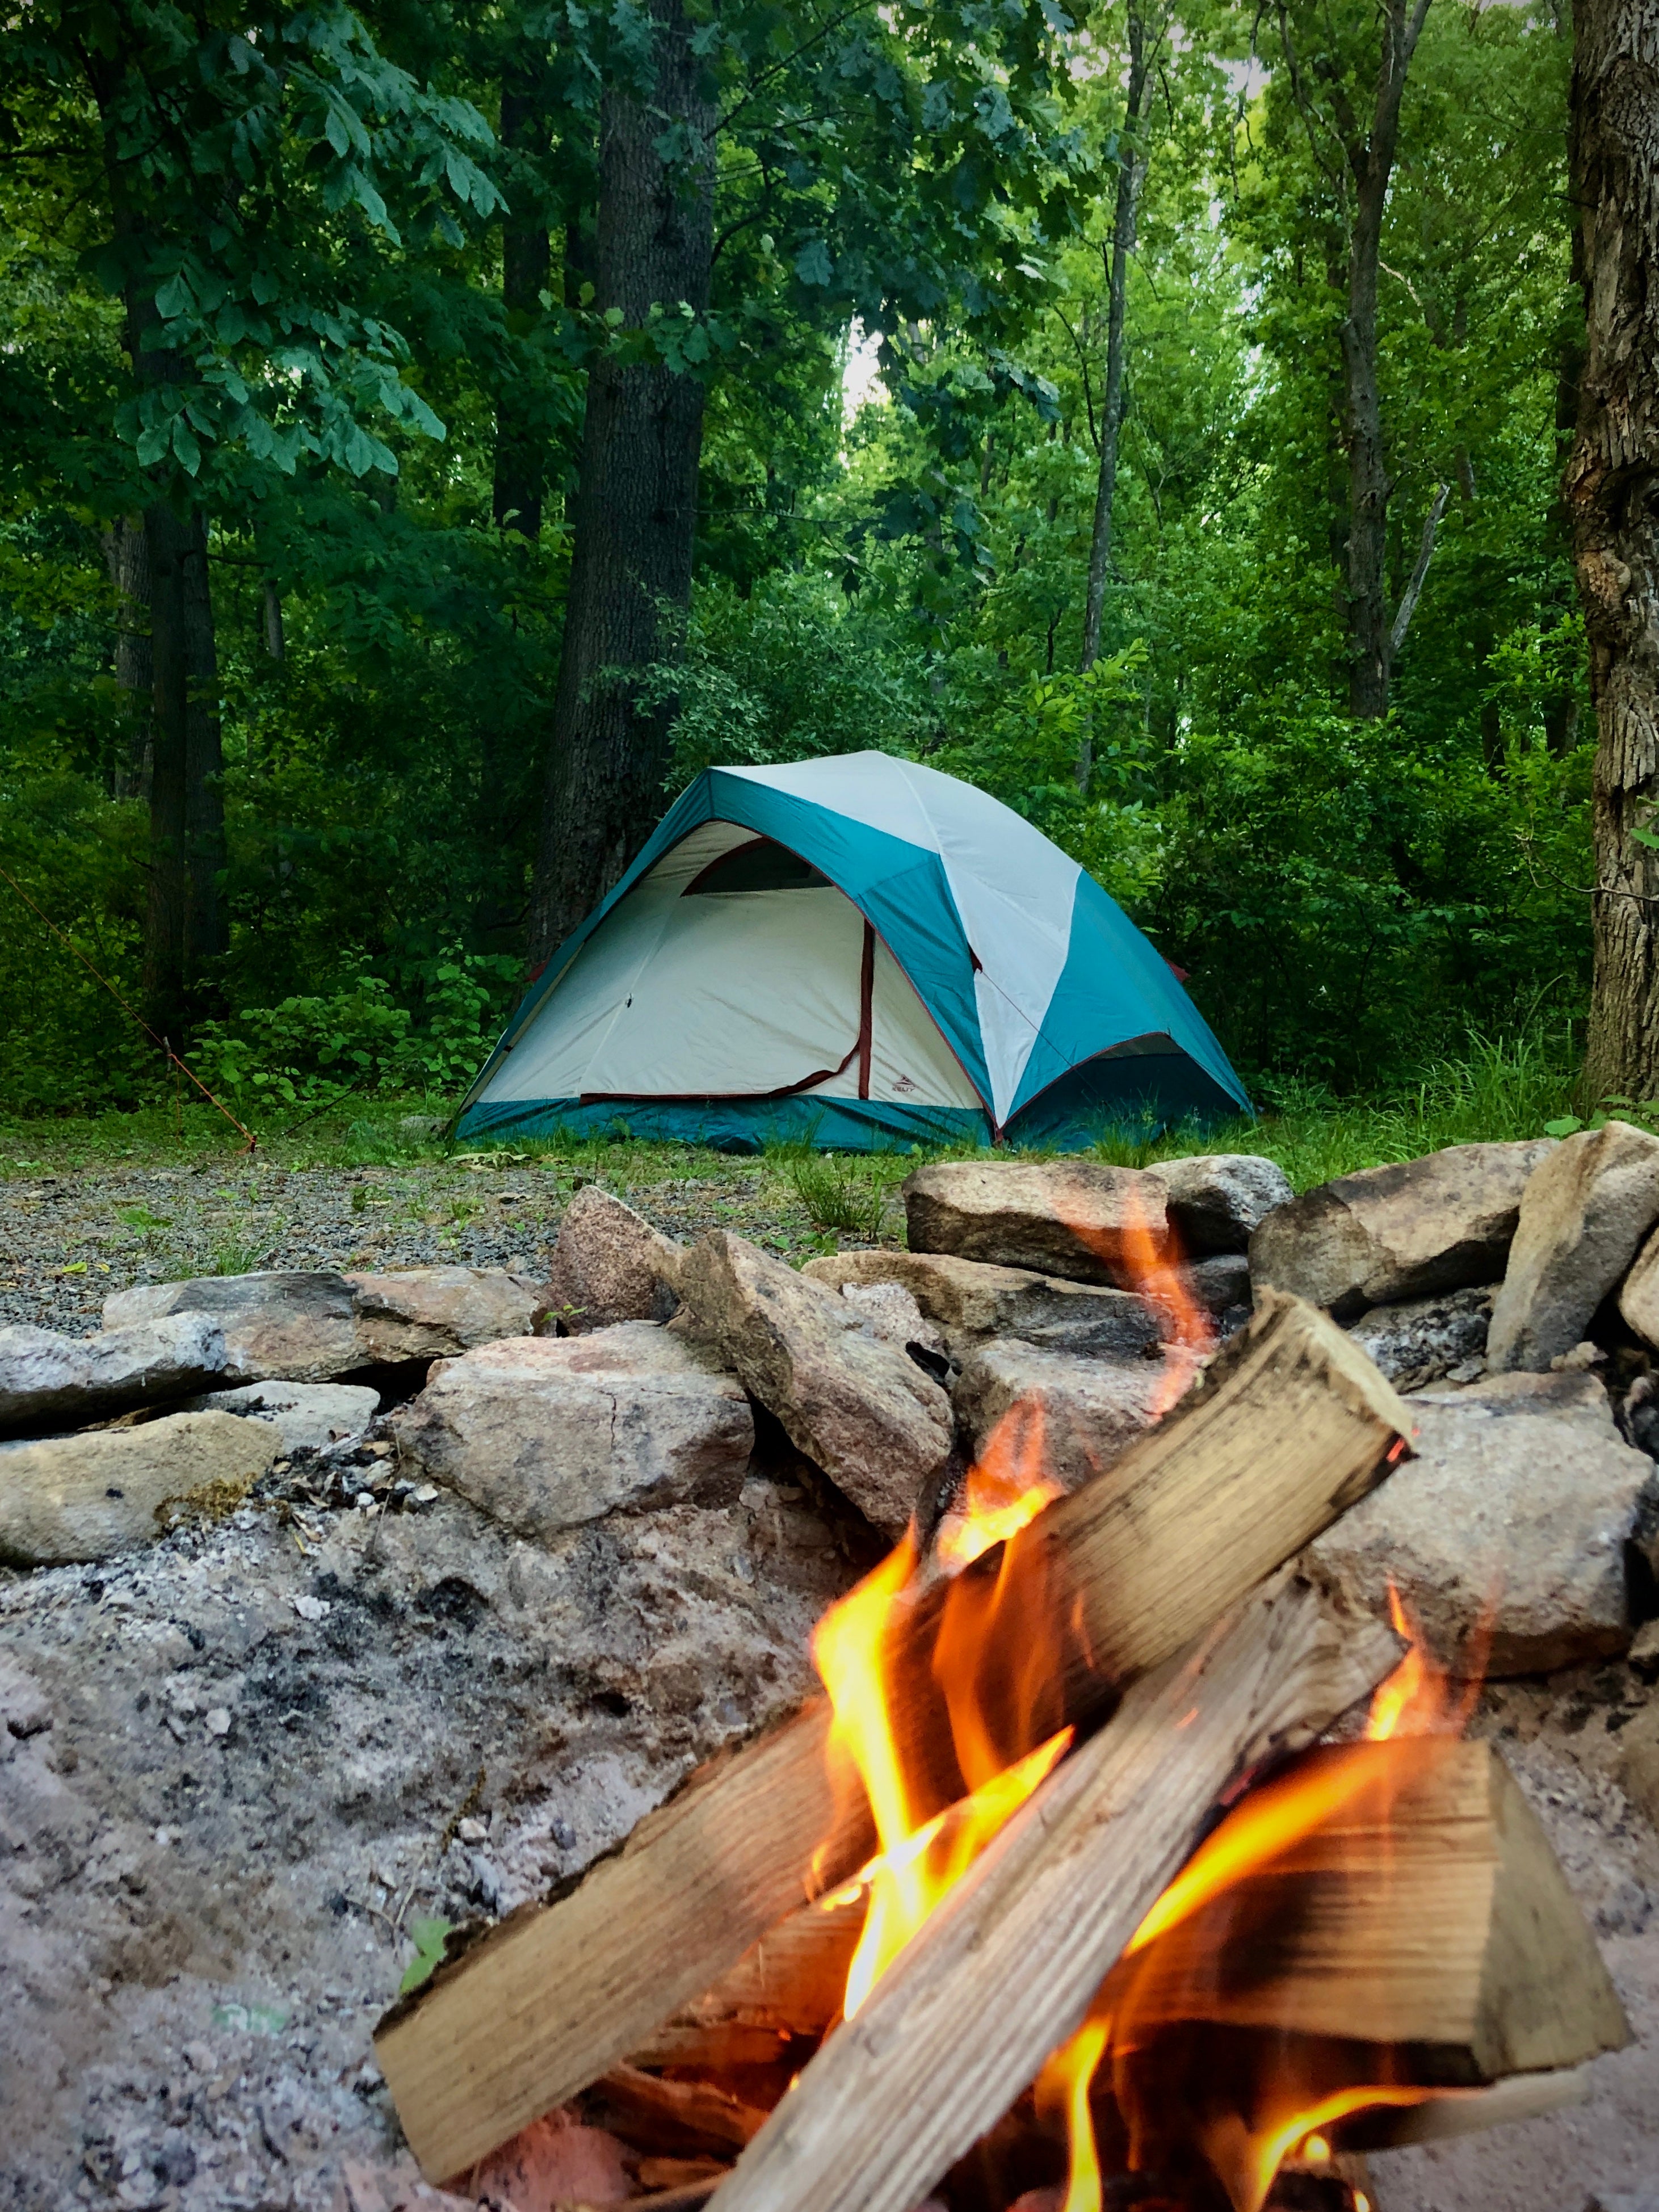 A peaceful evening at the edge of the woods. We stayed at site #97